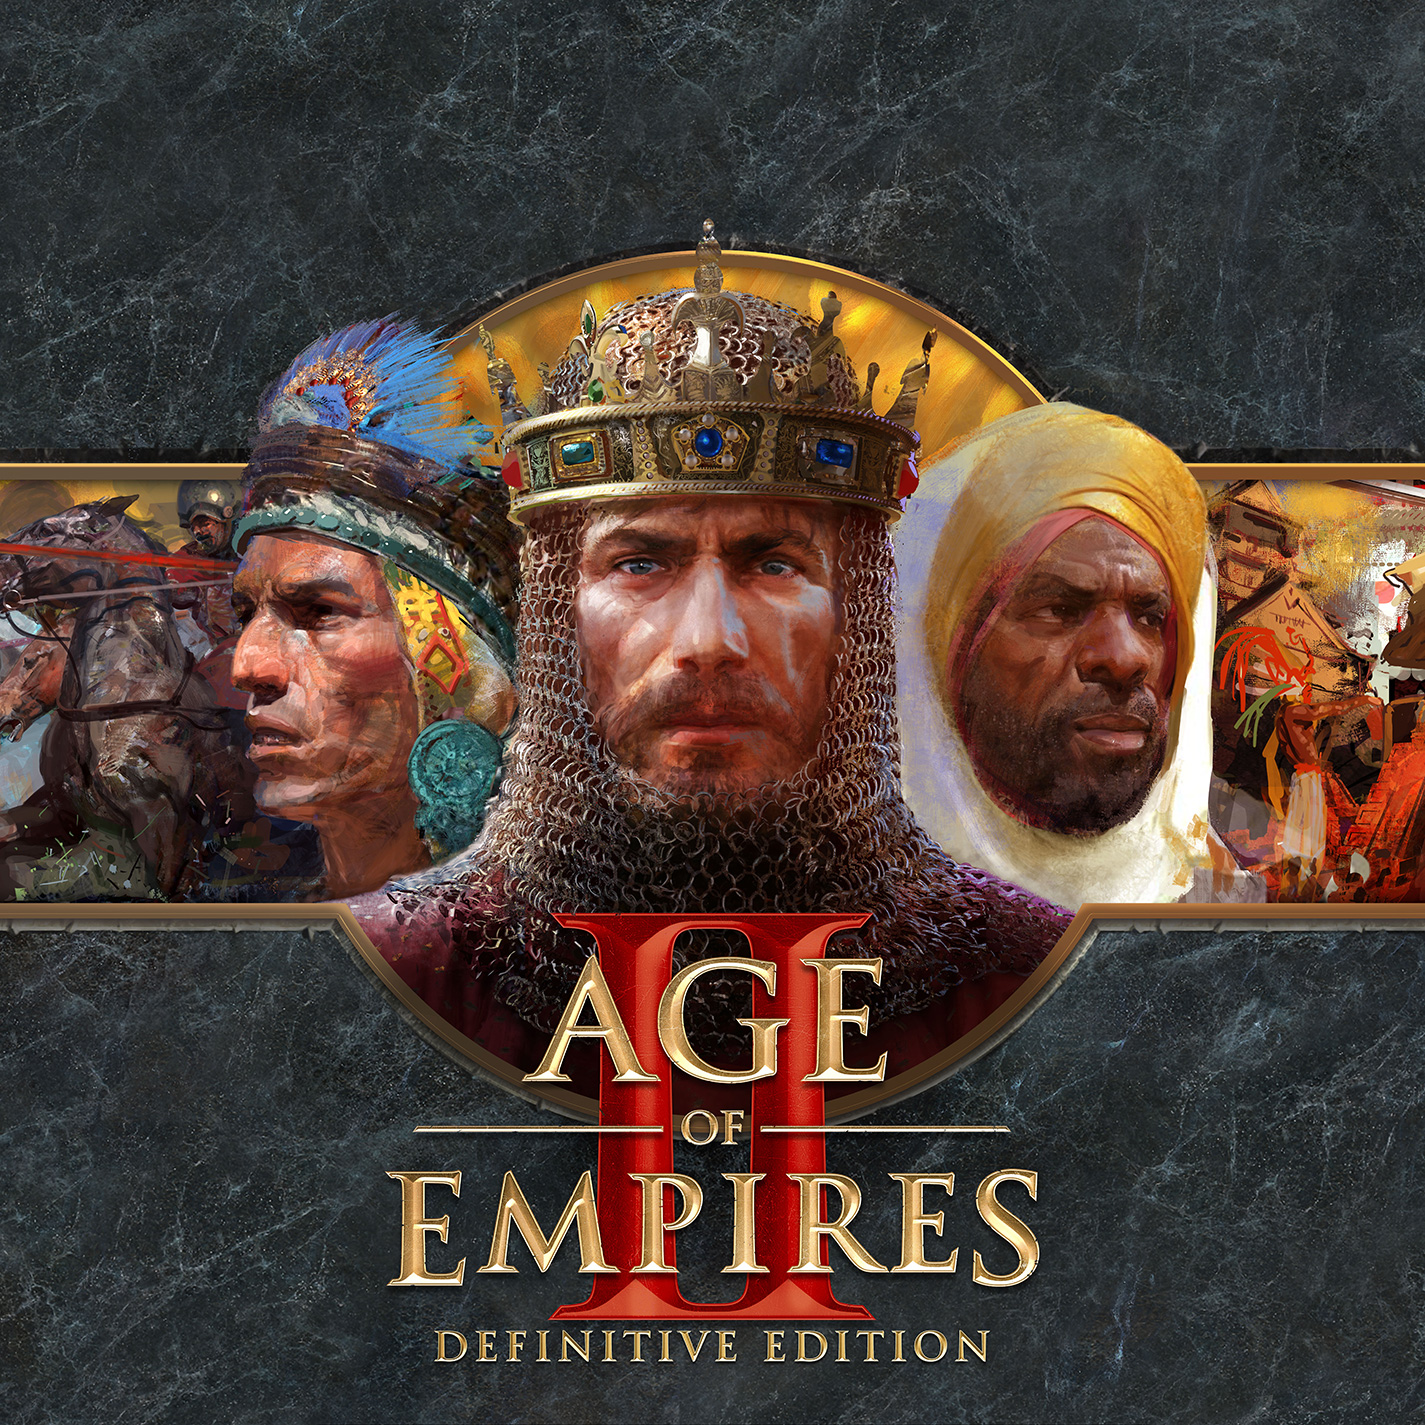 Age of Empires II: Definitive Edition - predn CD obal